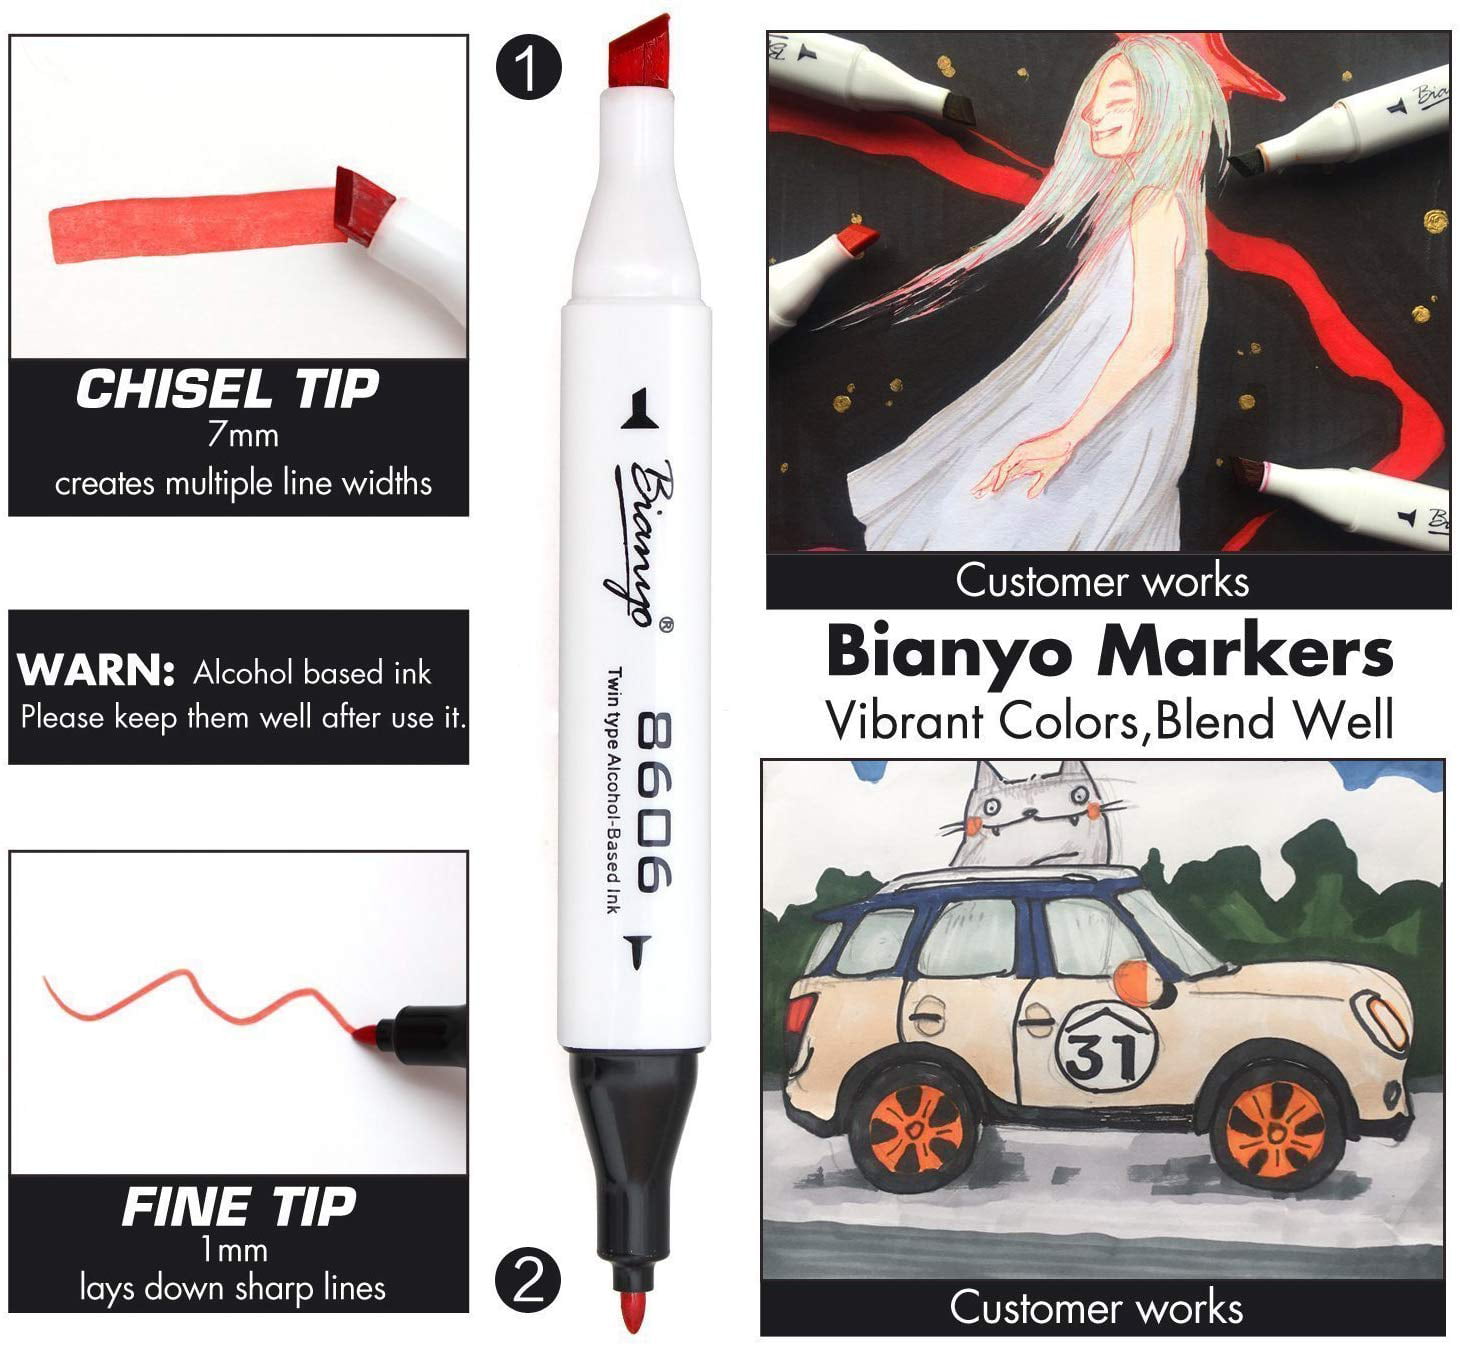 Bianyo Classic Markers - Marker Review 